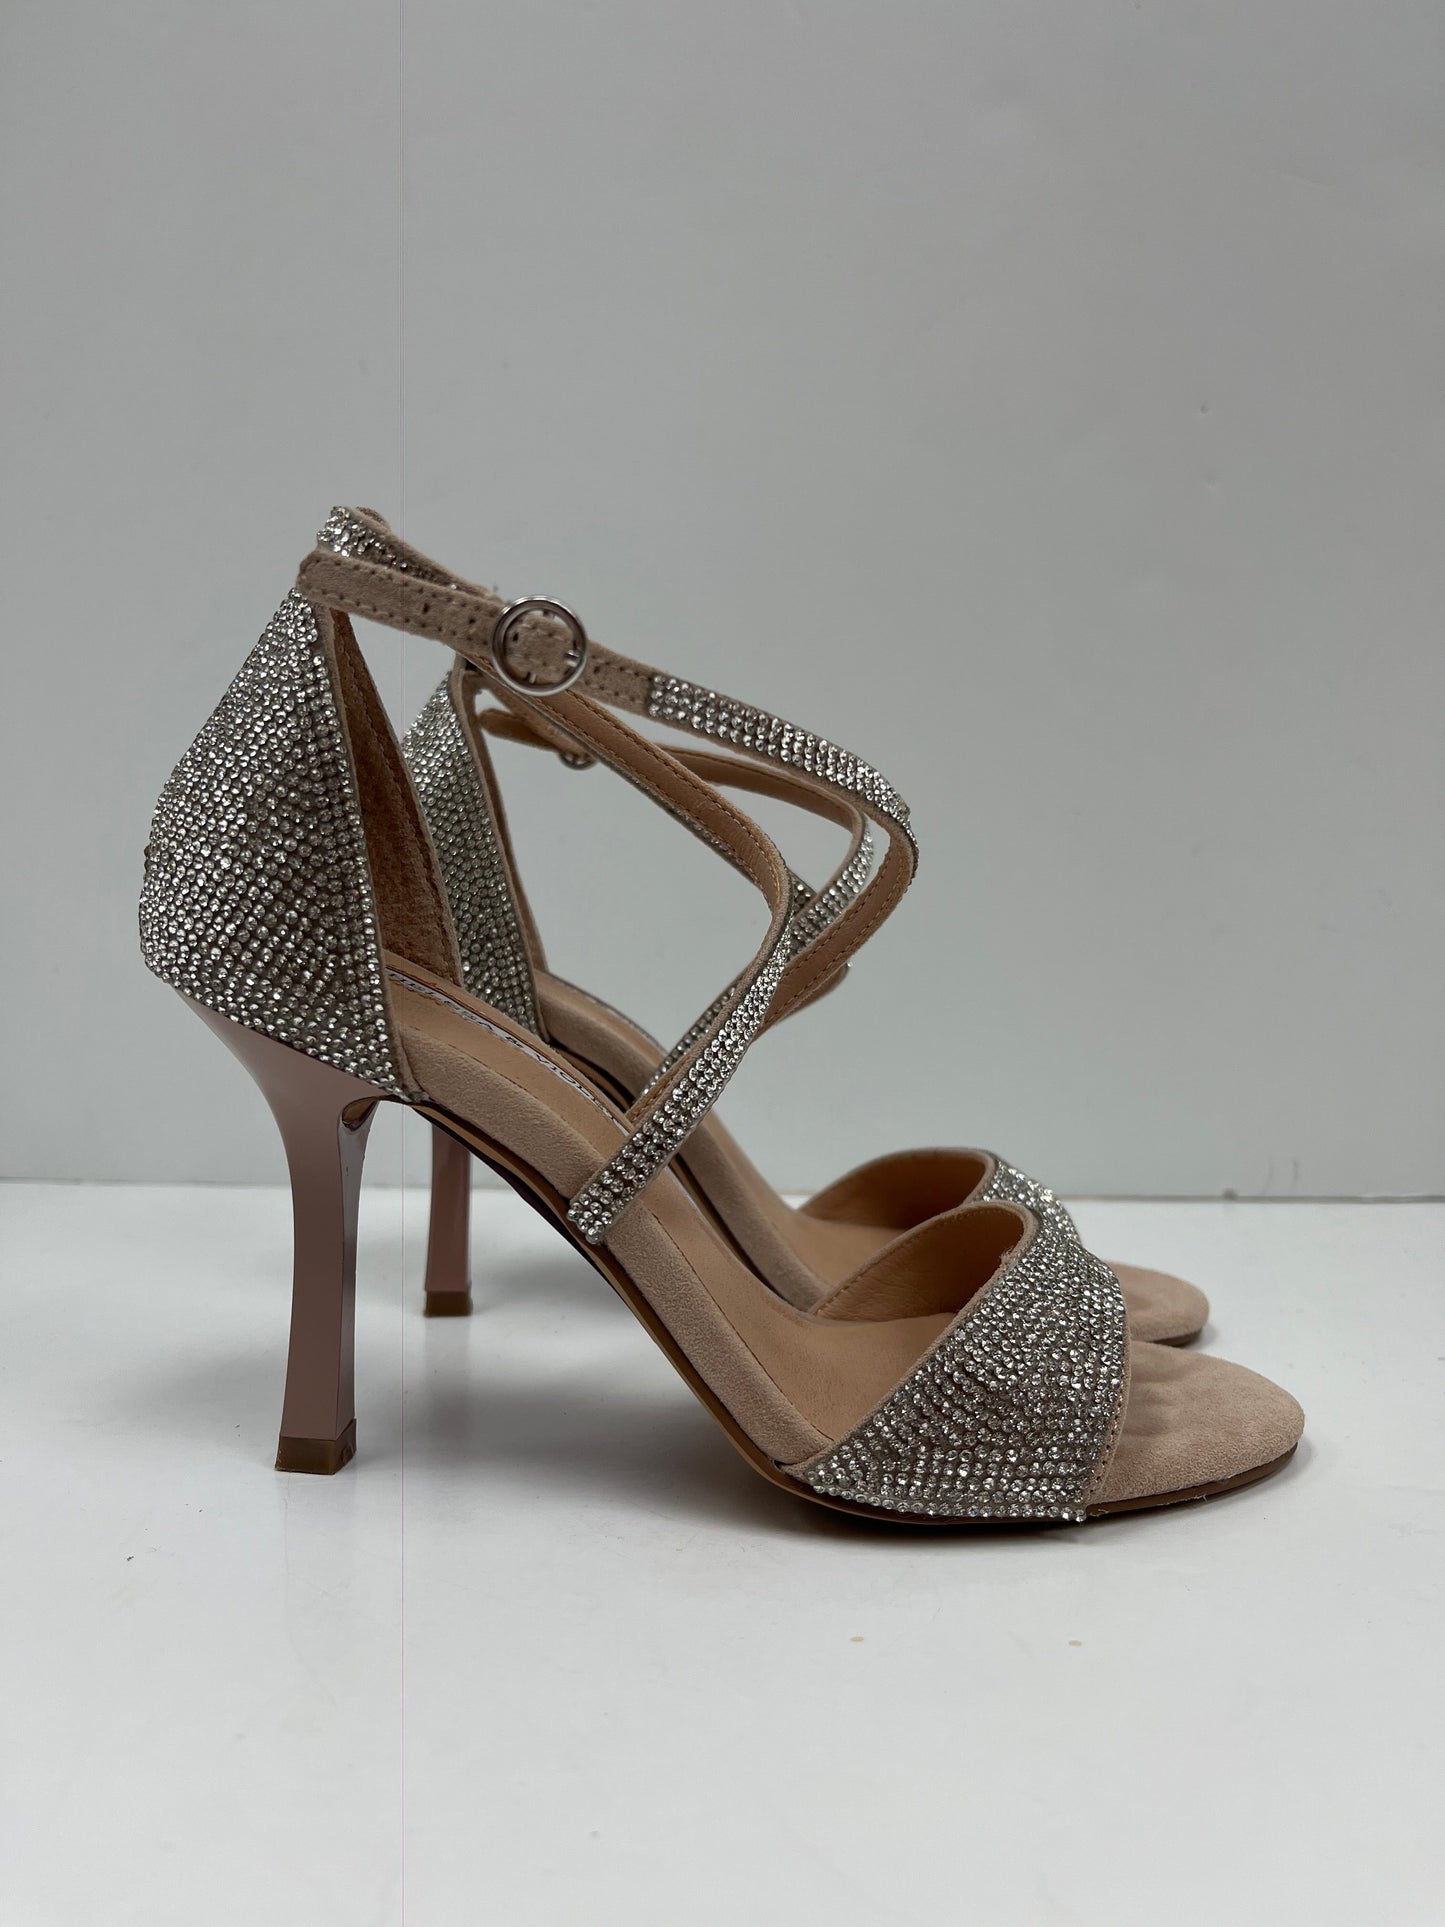 Shoes Heels Stiletto By Chelsea And Theodore  Size: 5.5